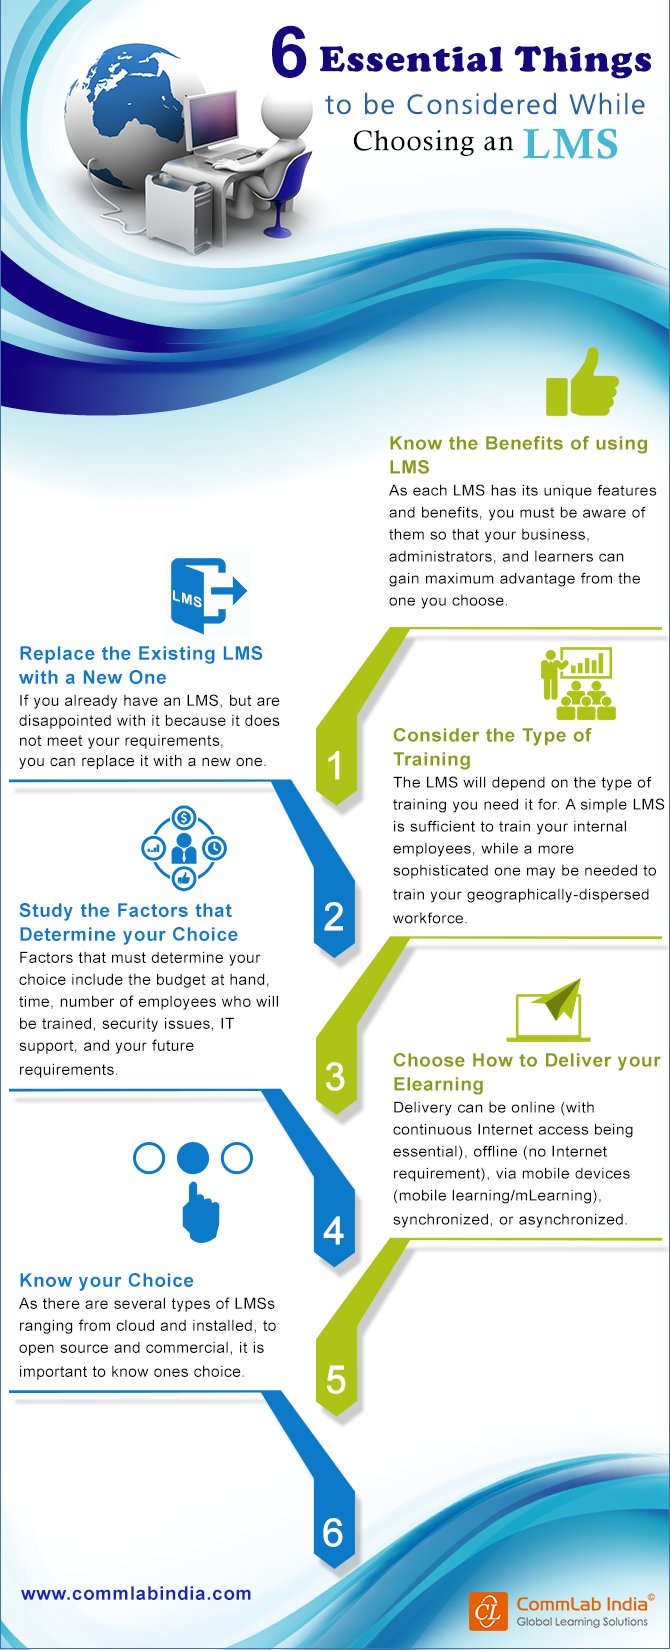 6 Essential Things to be Considered While Choosing an LMS [Infographic]